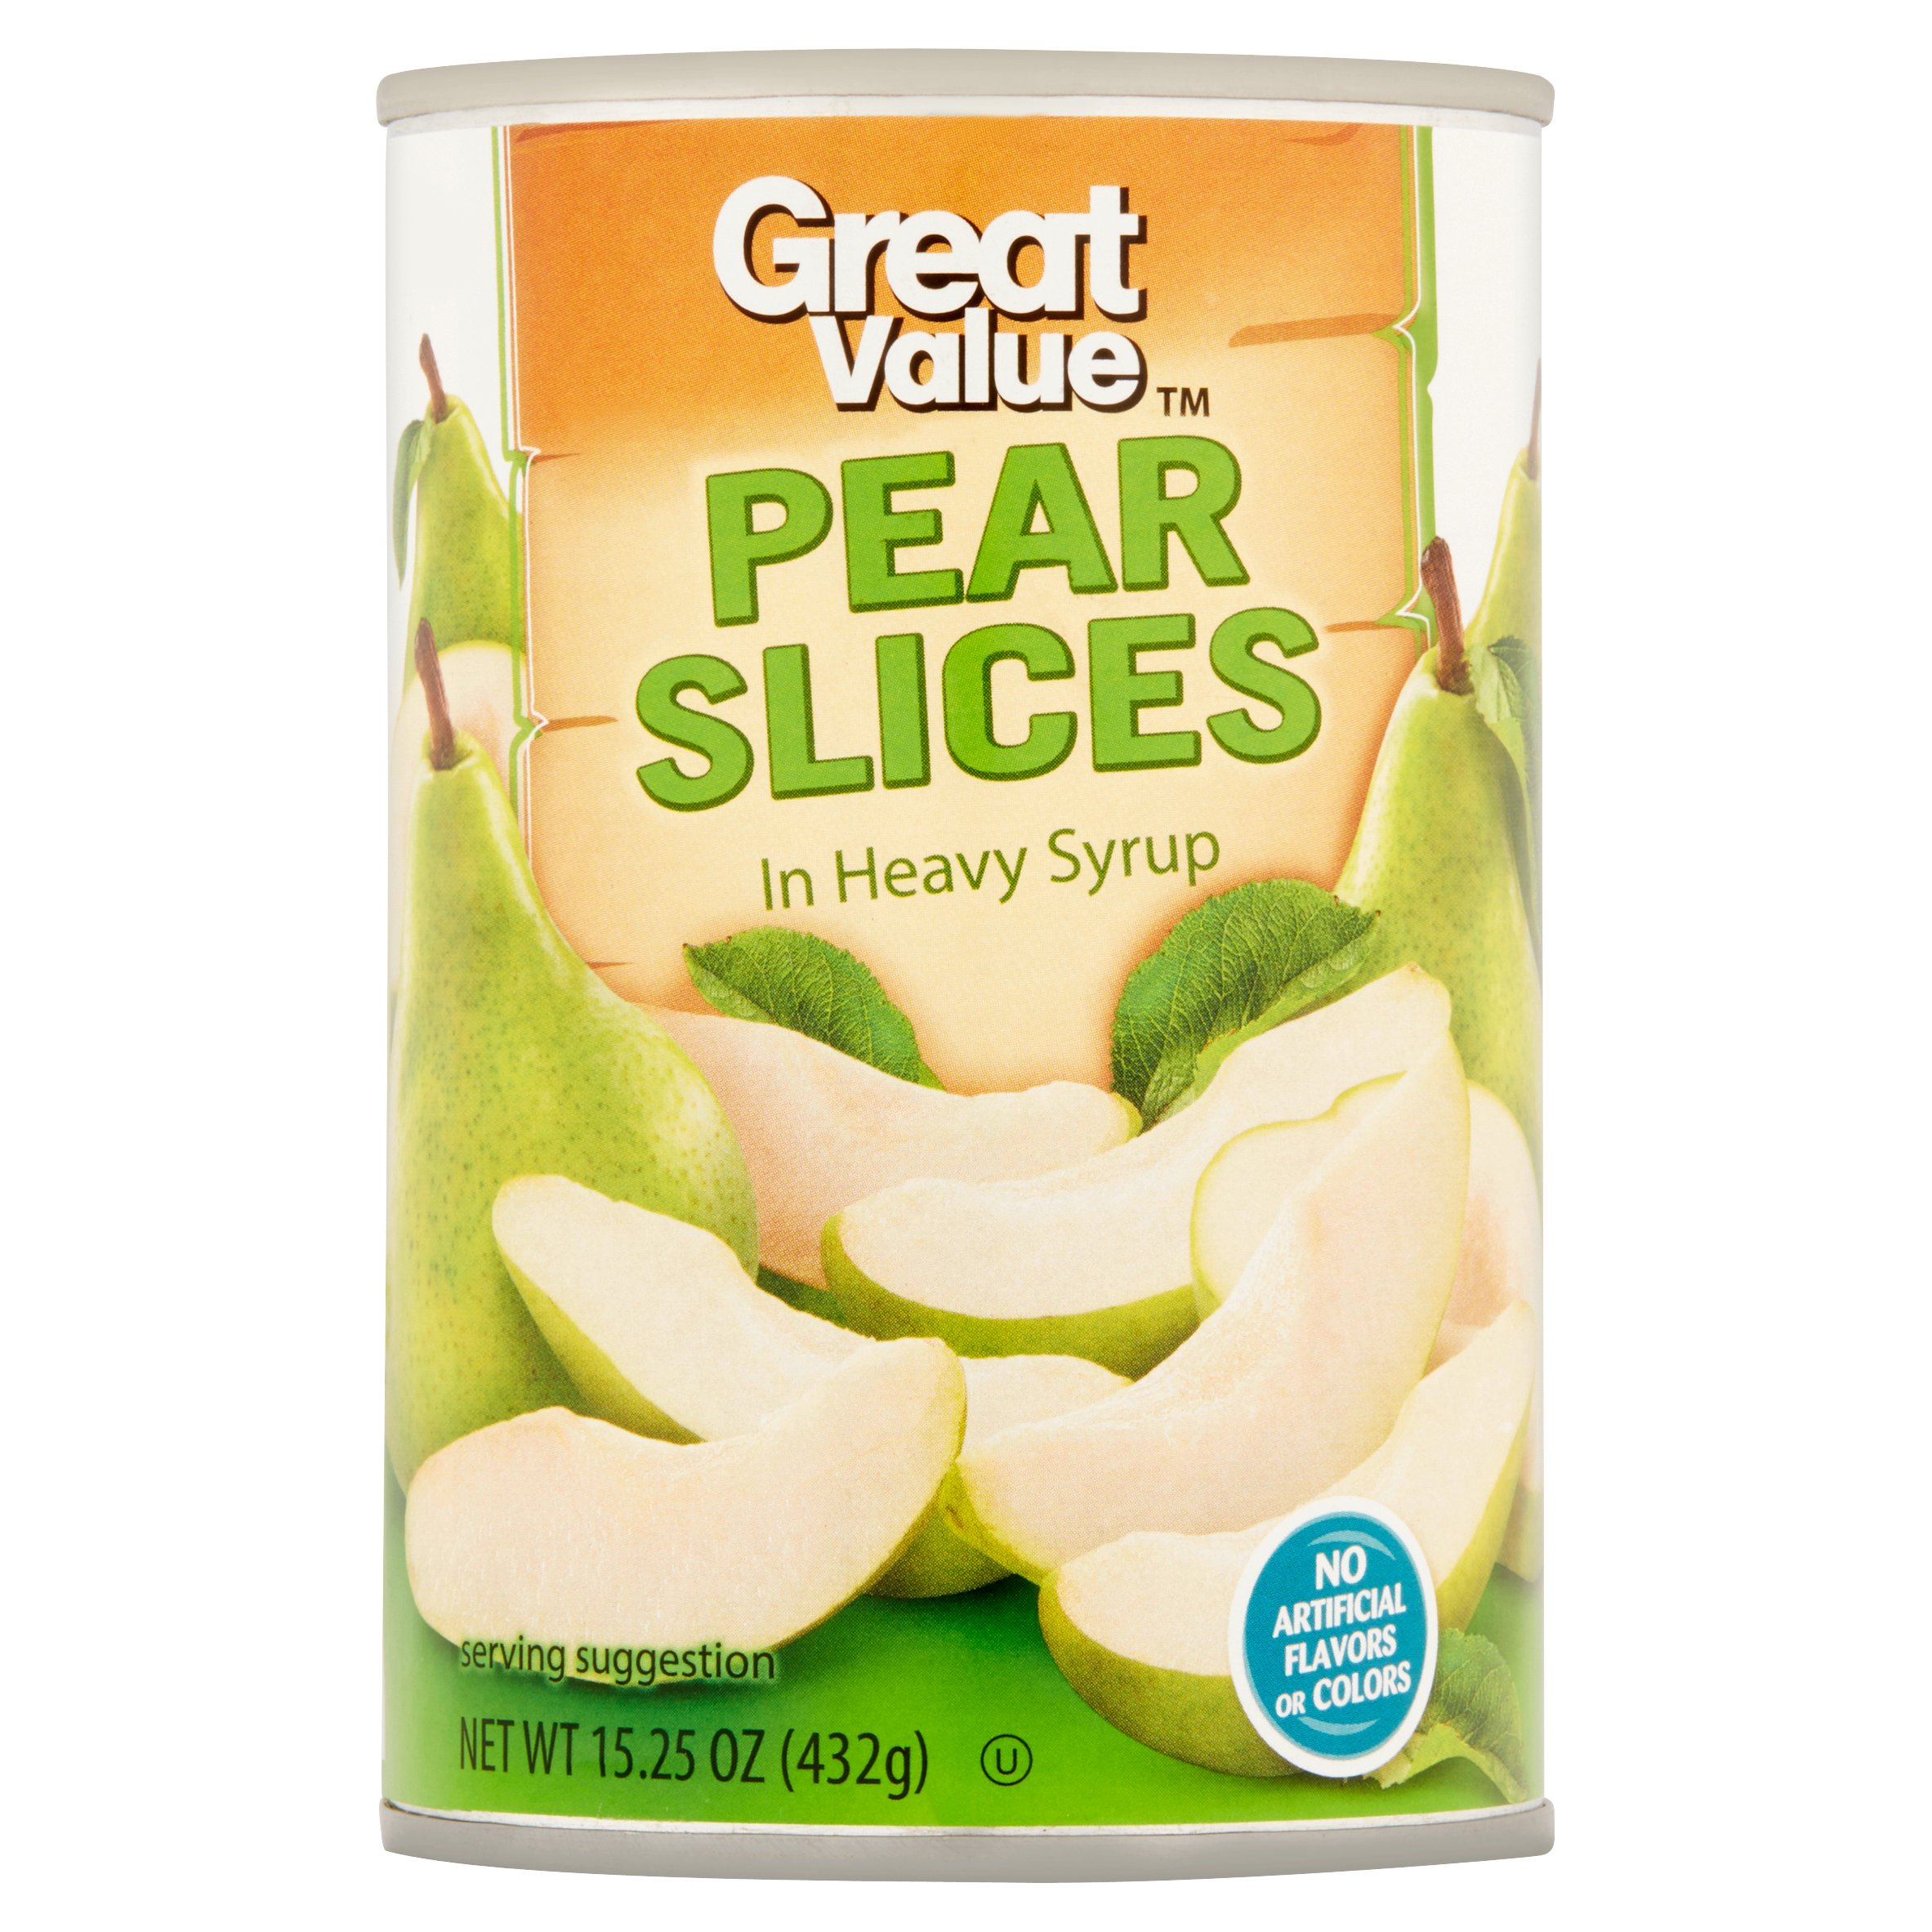 Great Value Pear Slices in Heavy Syrup 15.25 oz